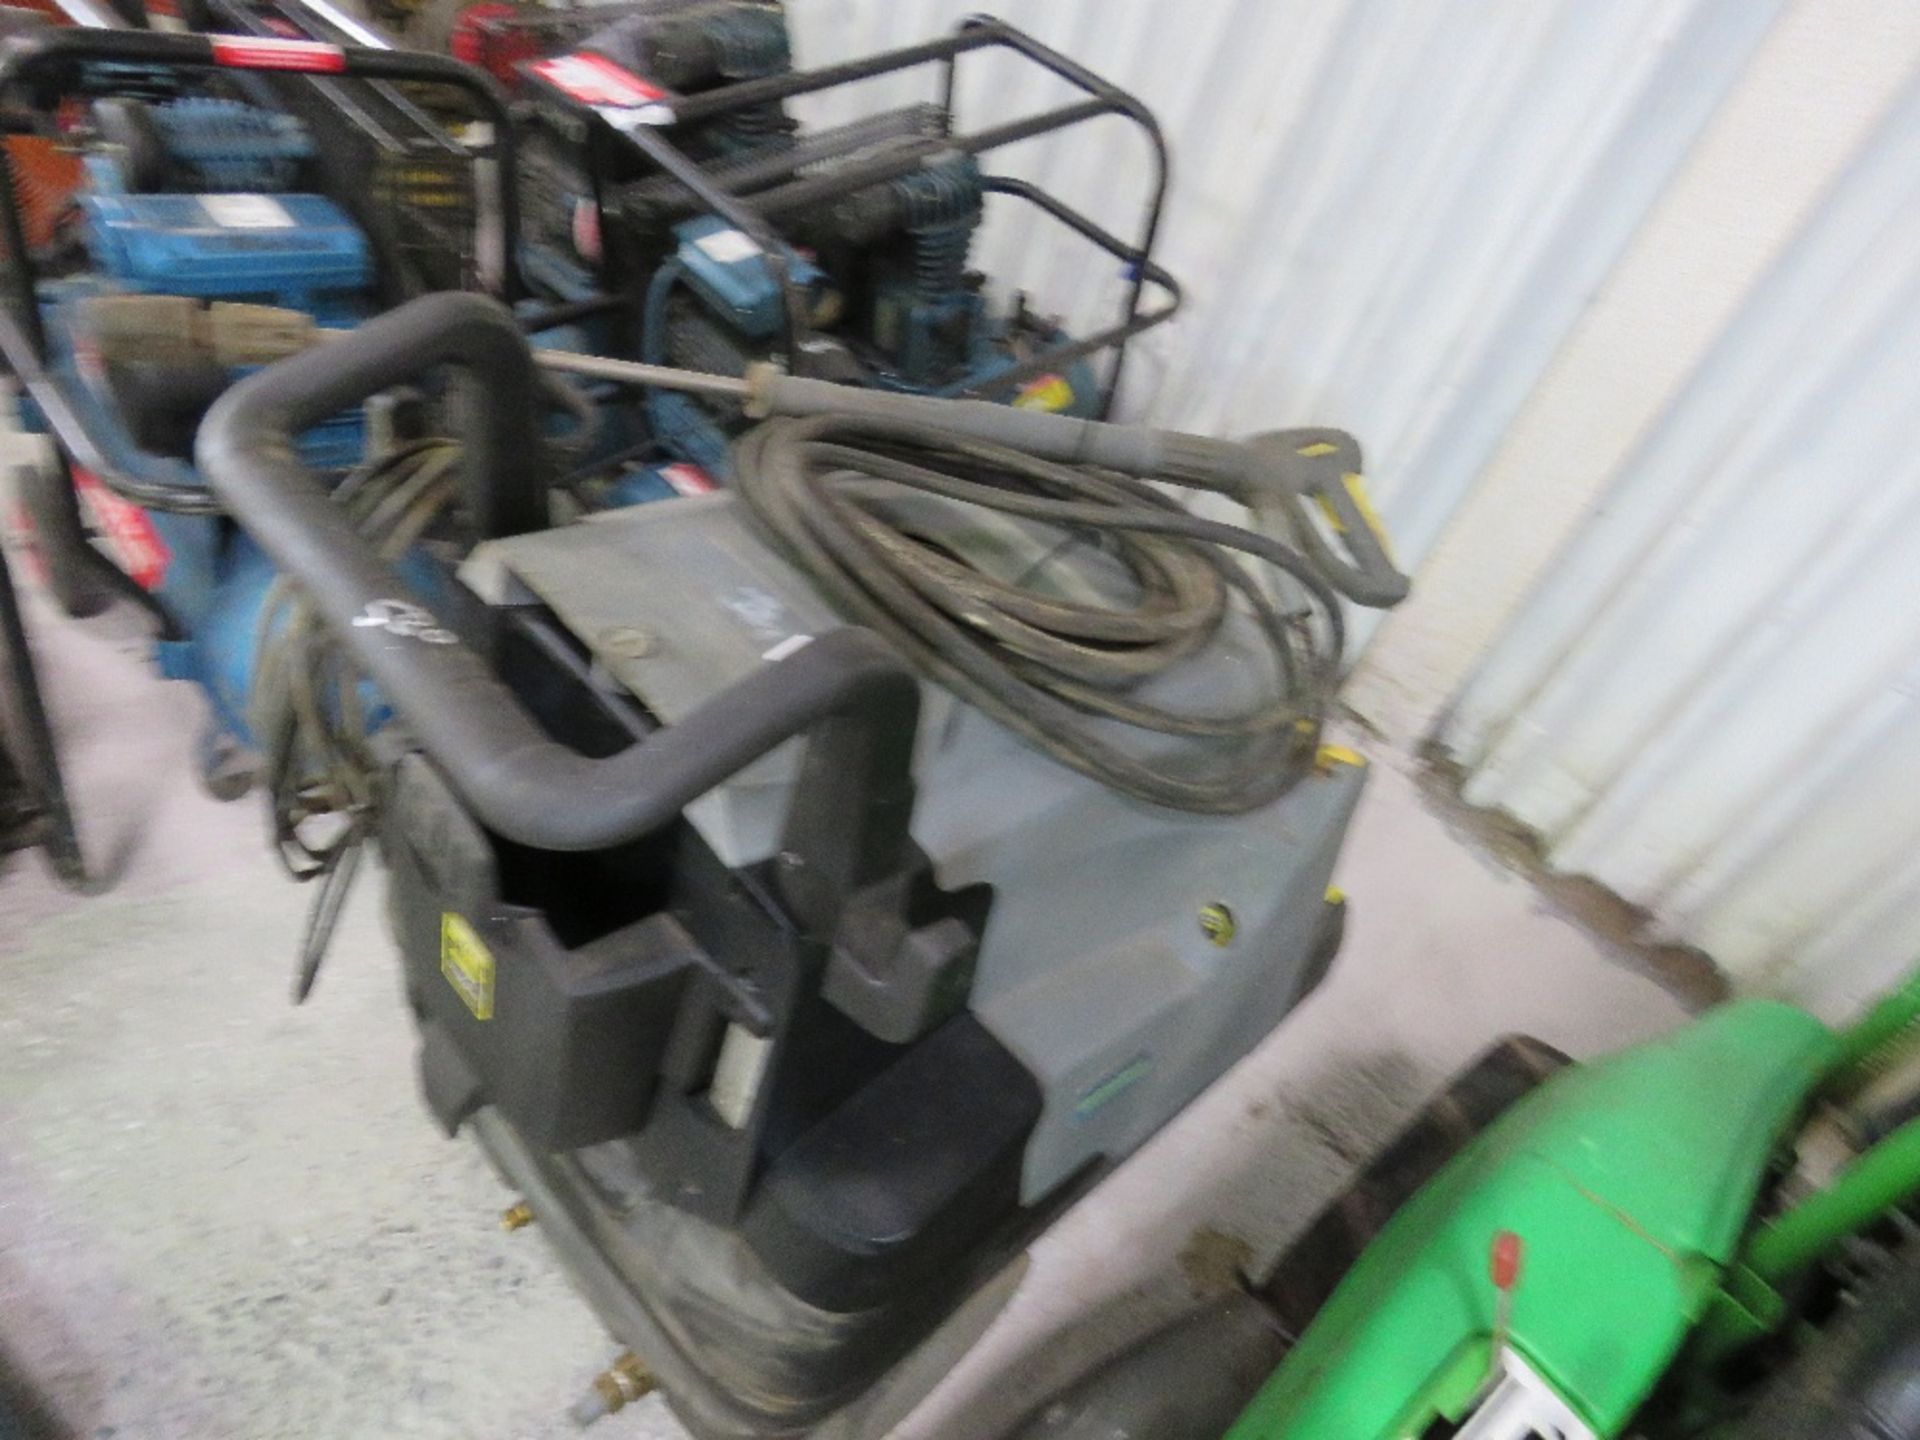 KARCHER 240VOLT PROFESSIONAL STEAM CLEANER WITH LANCE AND HOSE. UNTESTED, CONDITION UNKNOWN. - Image 2 of 3